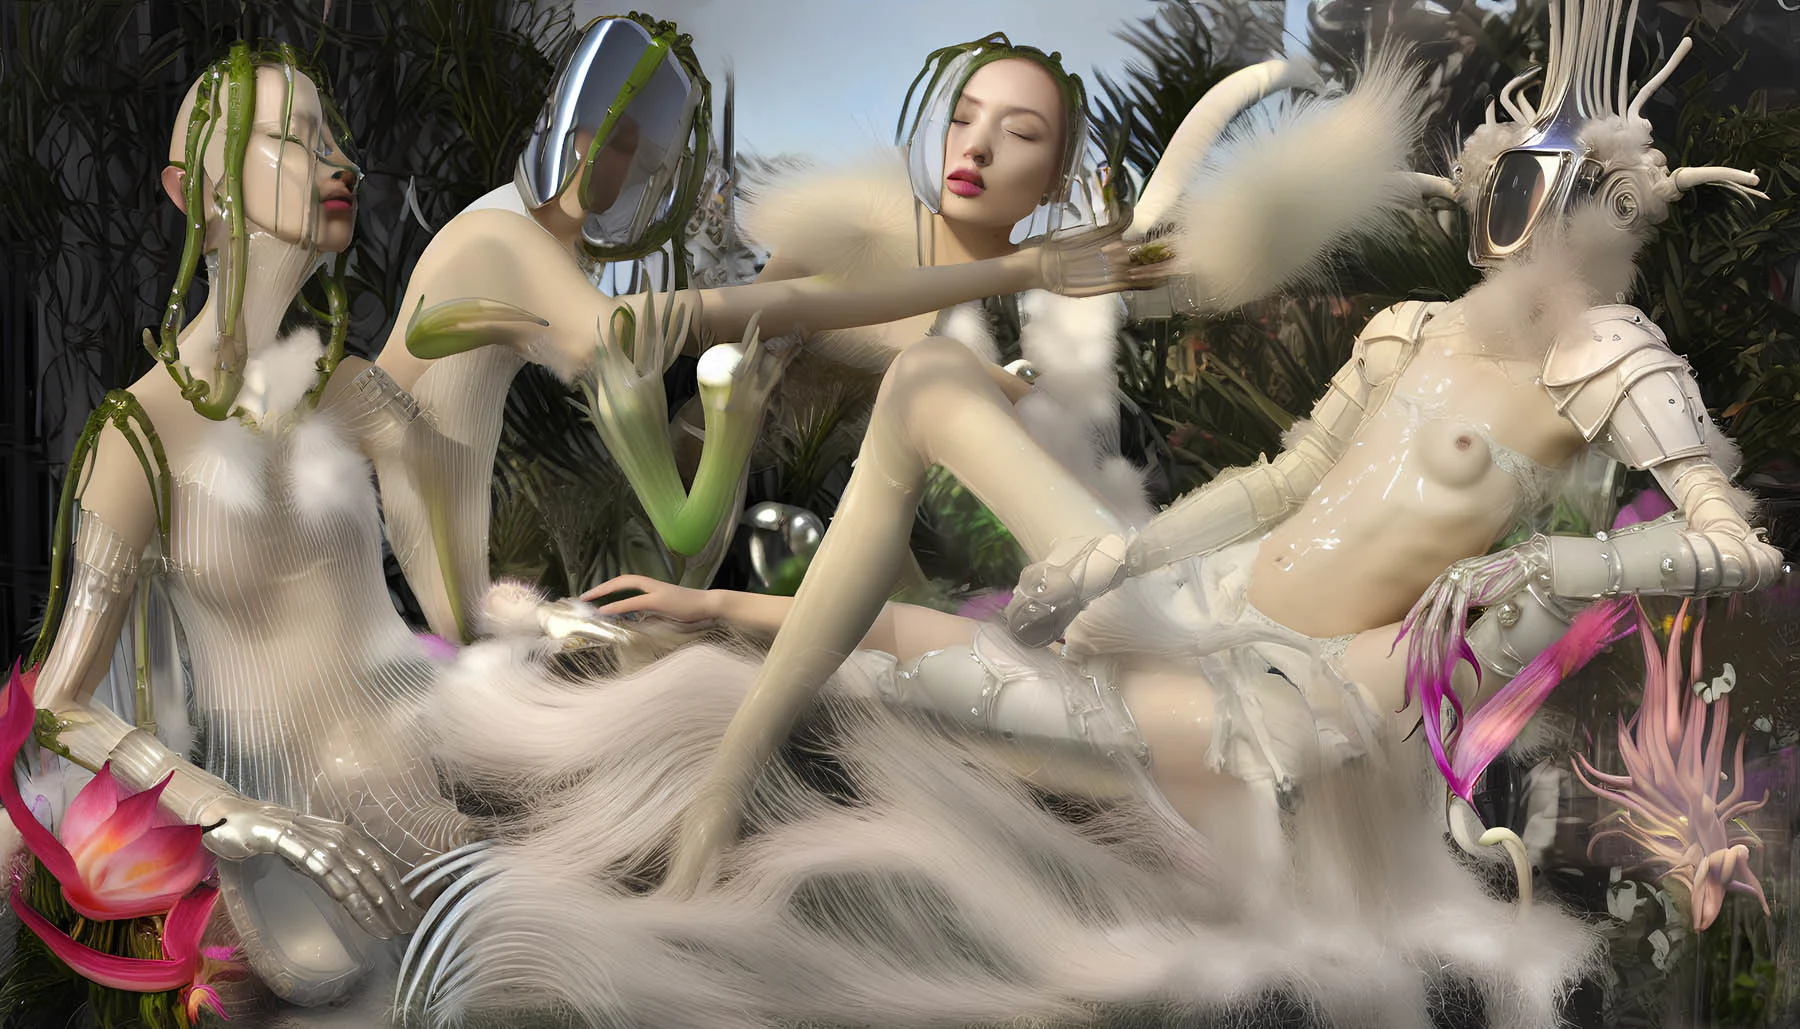 Four computer-generated female figures lie peacefully against a lush and soft background, surrounded by nature and exotic flowers. Their limbs feature endings of metallic armors, pearls, plants, and flowers.